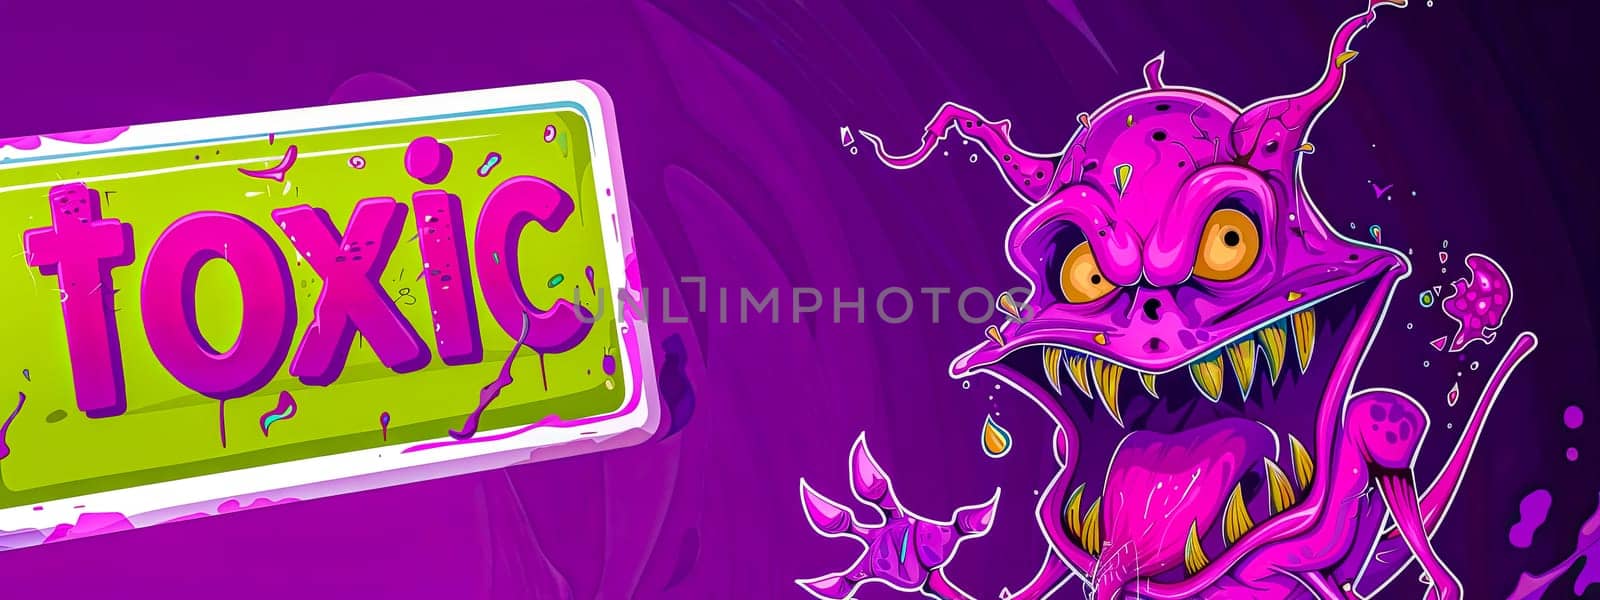 Colorful illustration of a cartoon monster with a toxic sign on a purple splash background